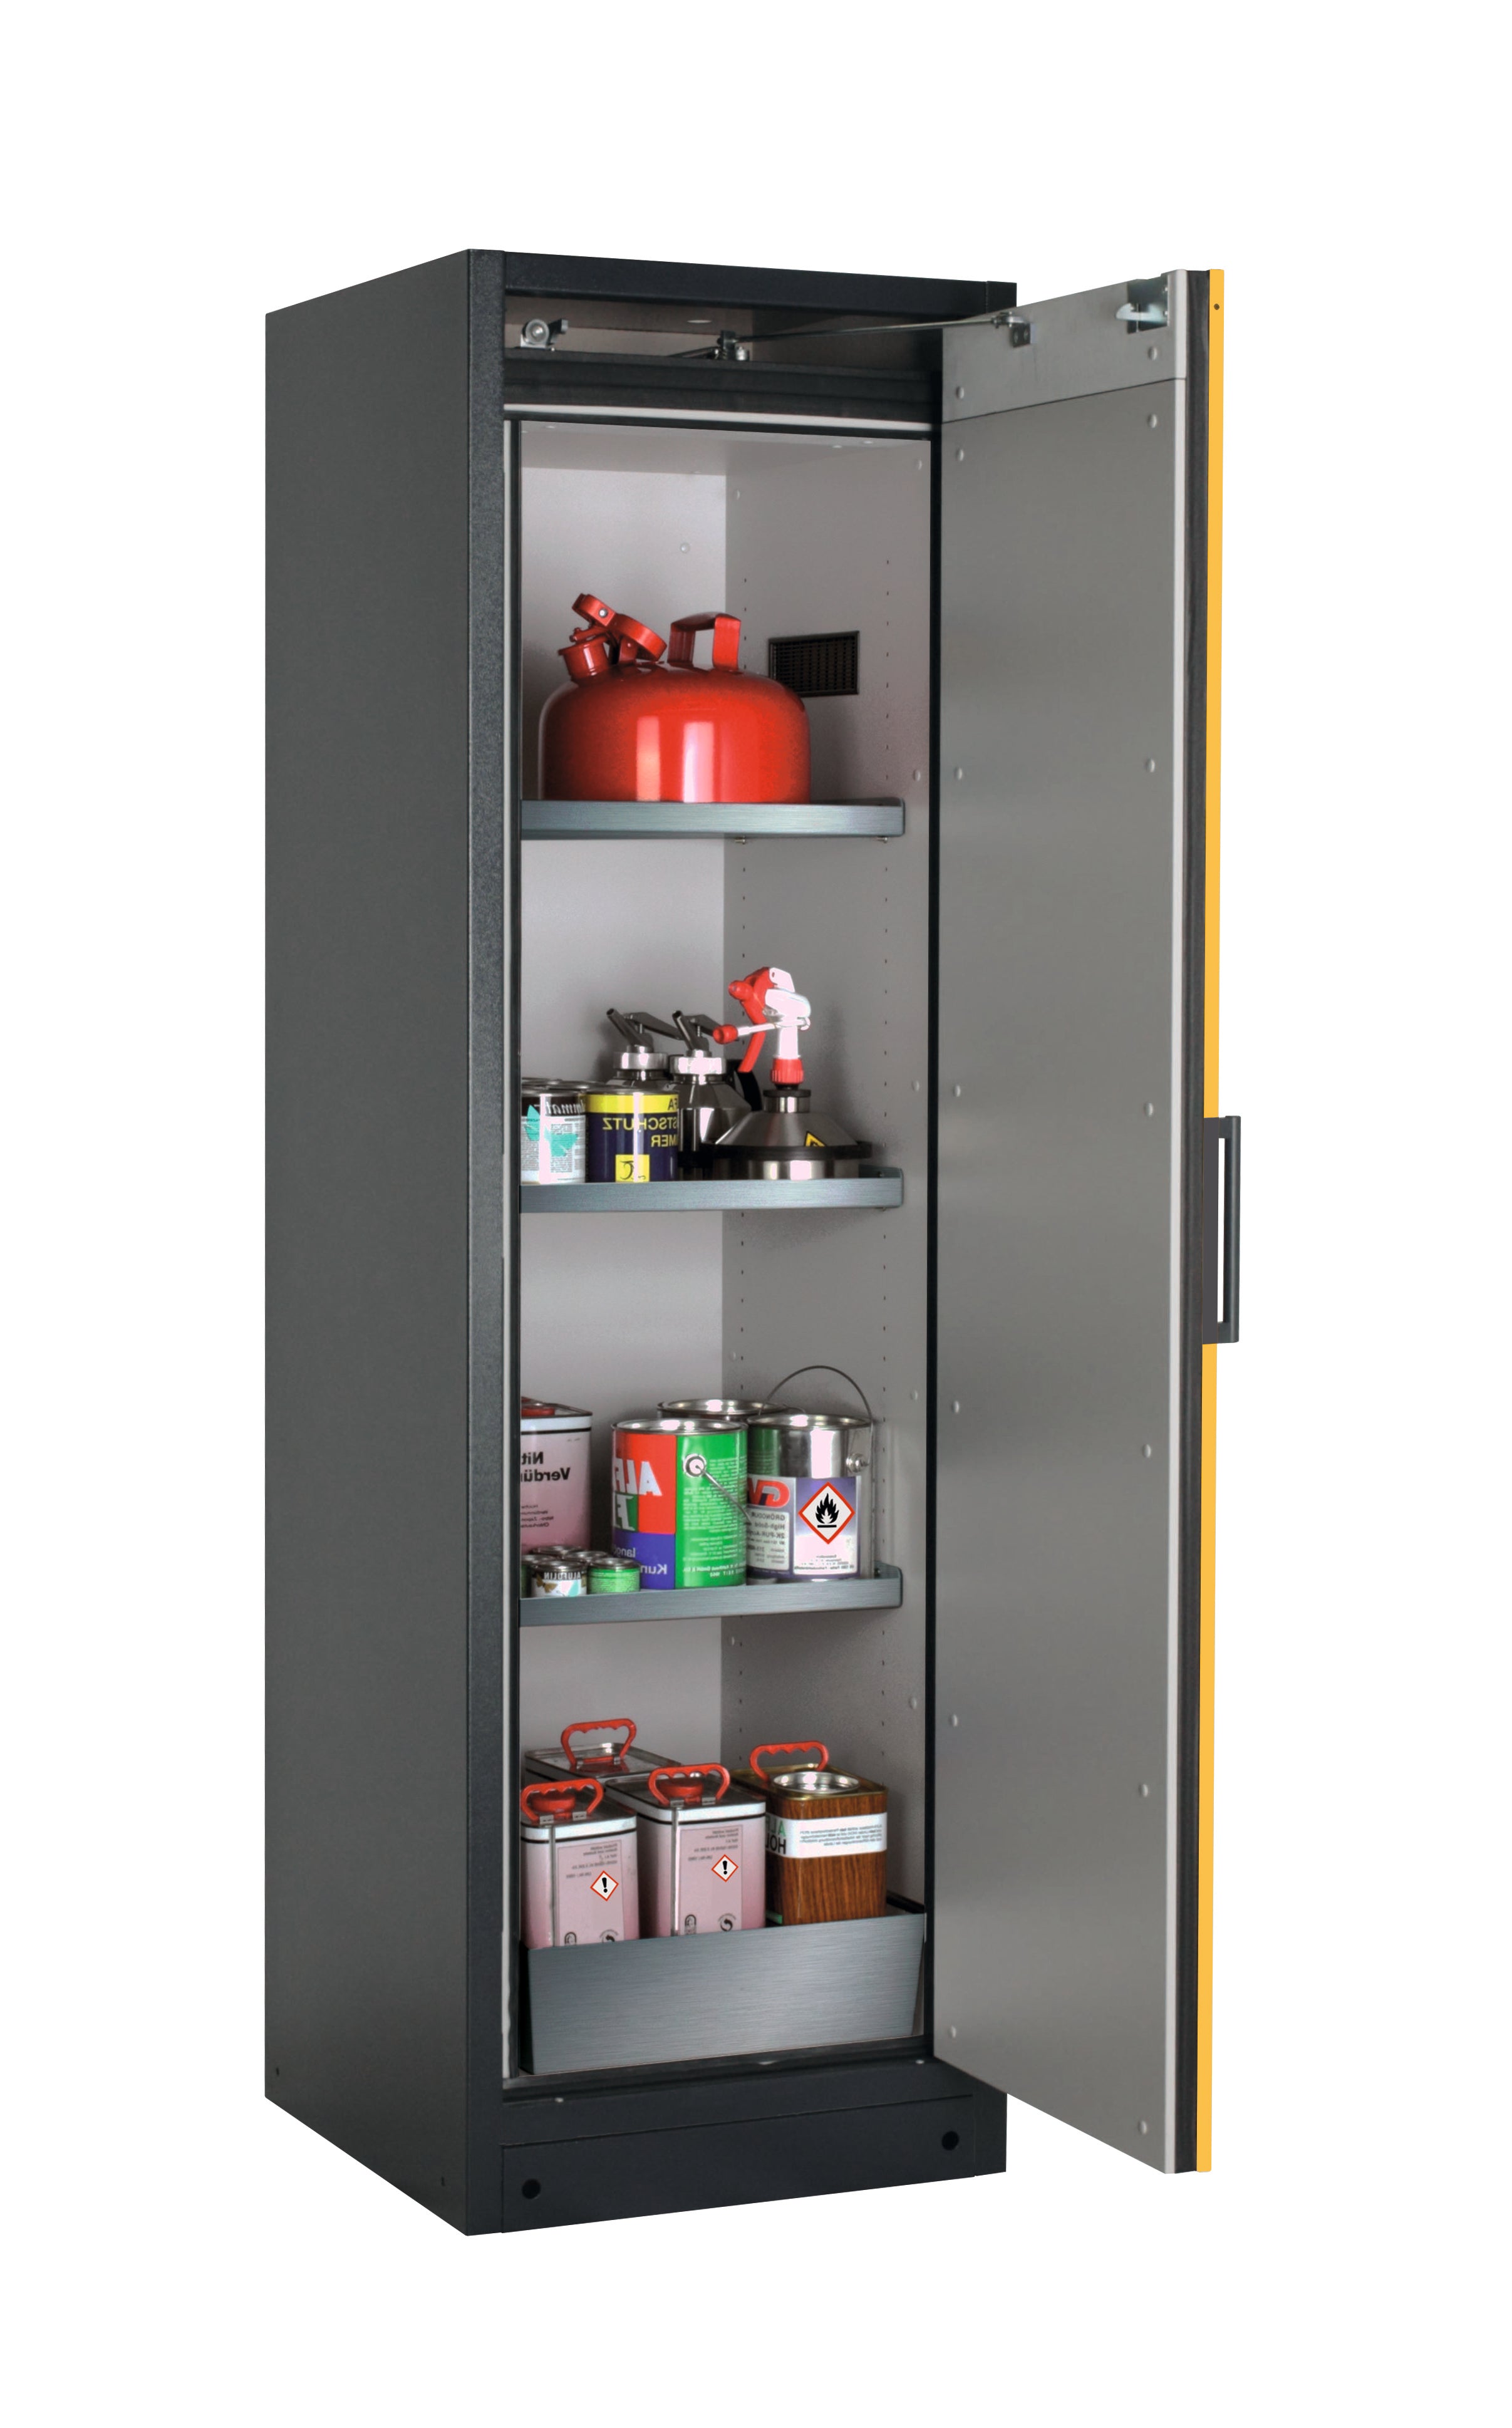 Type 90 safety storage cabinet Q-PEGASUS-90 model Q90.195.060.WDACR in warning yellow RAL 1004 with 3x shelf standard (stainless steel 1.4301),